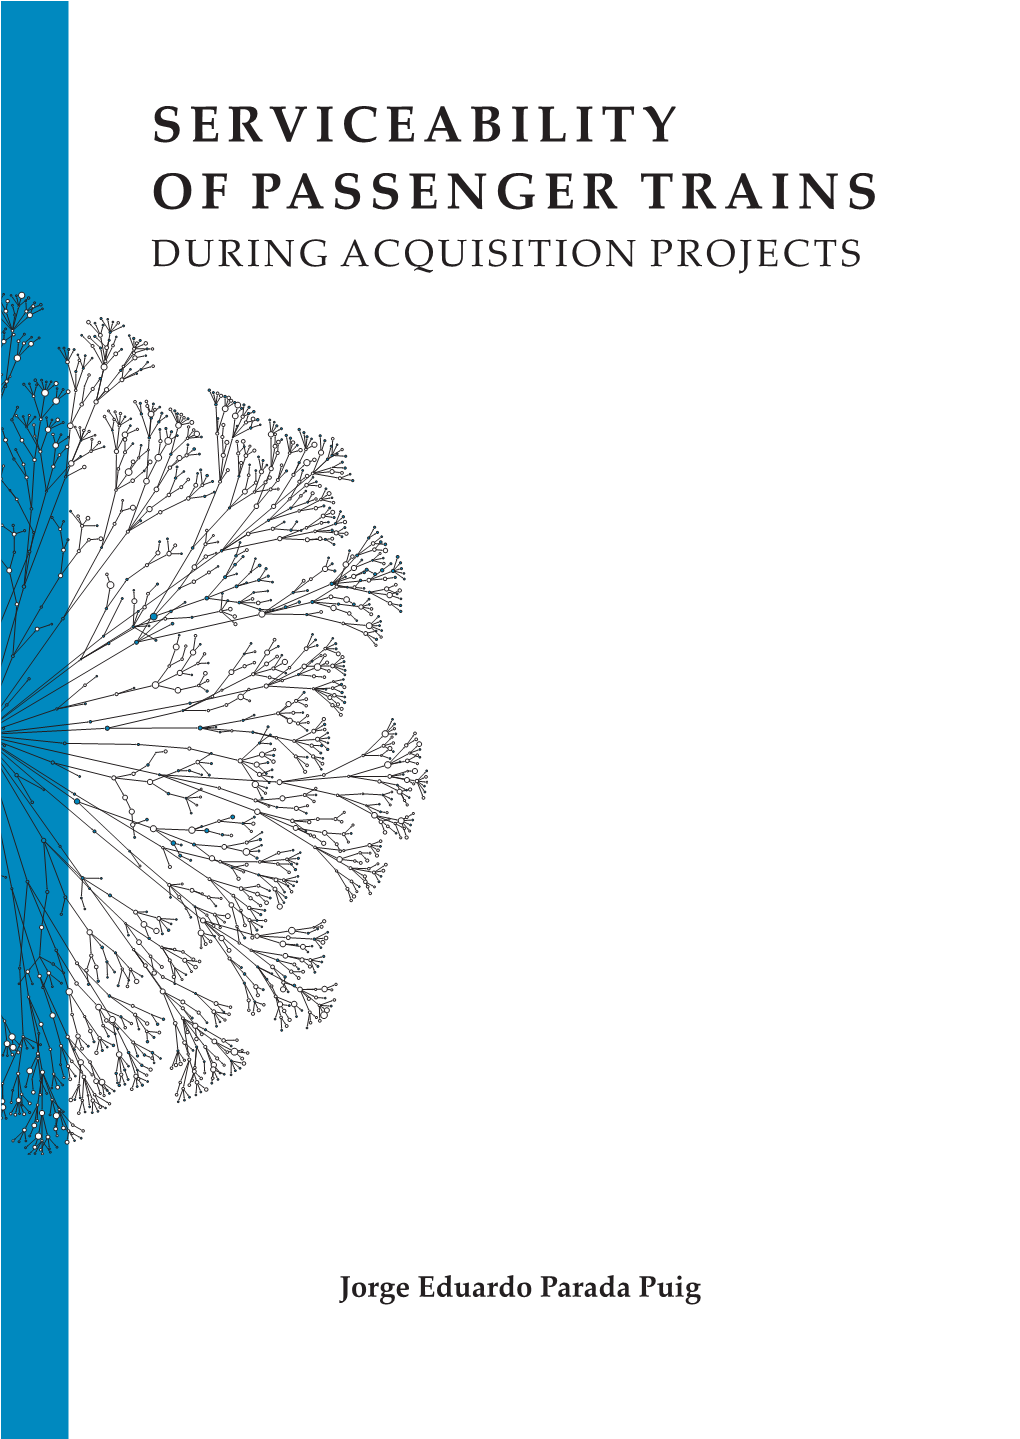 Serviceability of Passenger Trains During Acquisition Projects